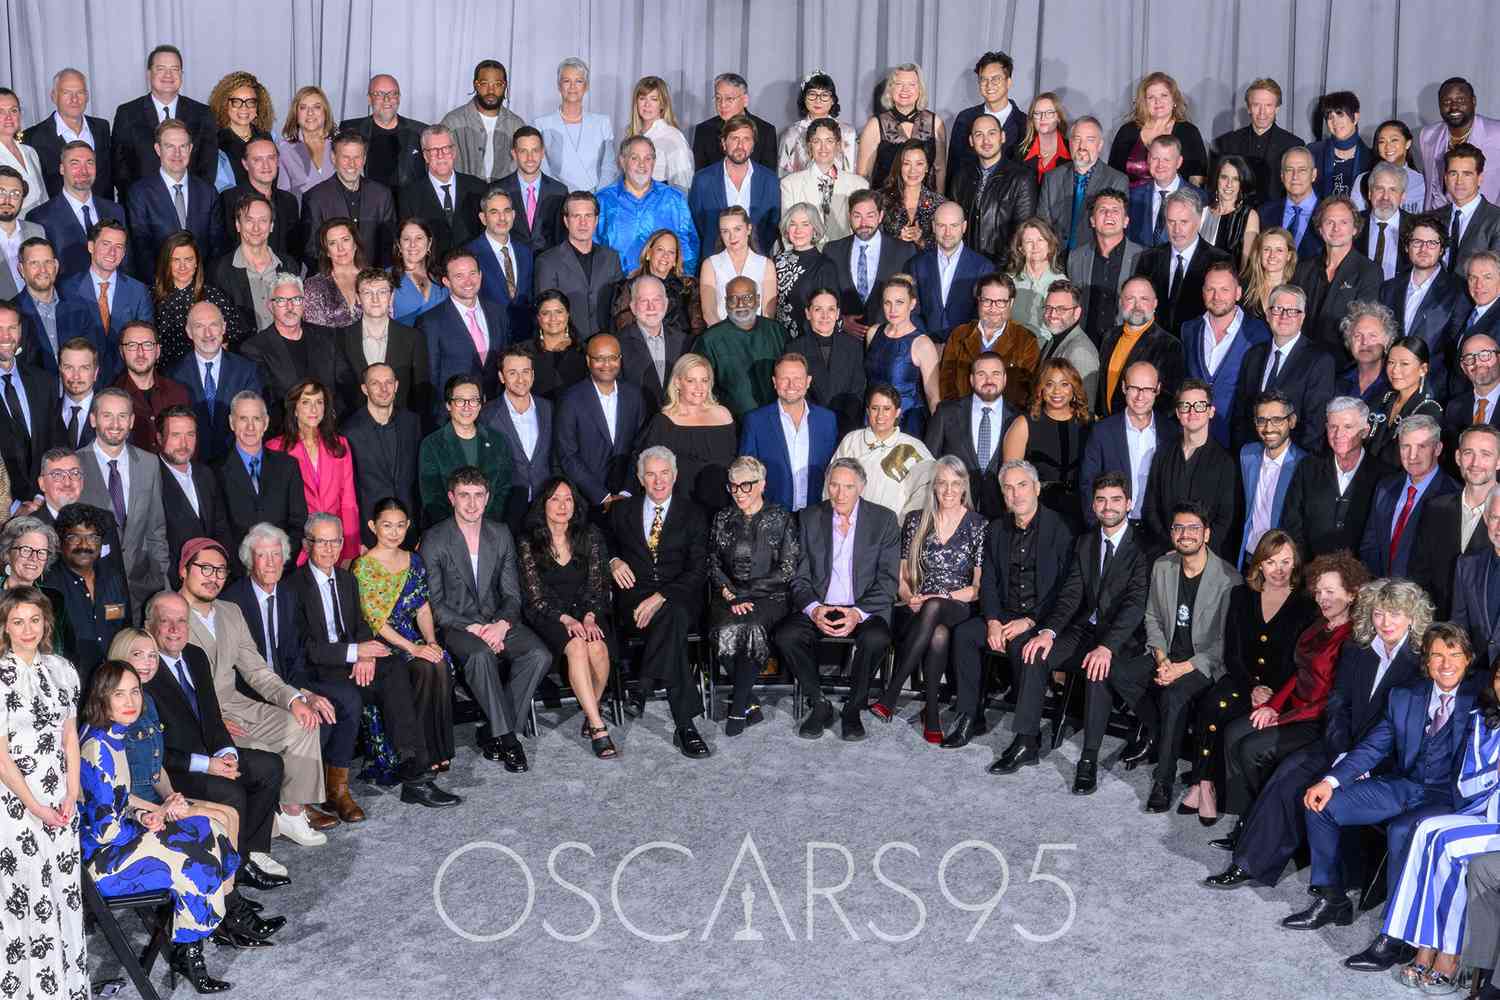 See the 2023 Oscar nominees strike a pose for their class photo News